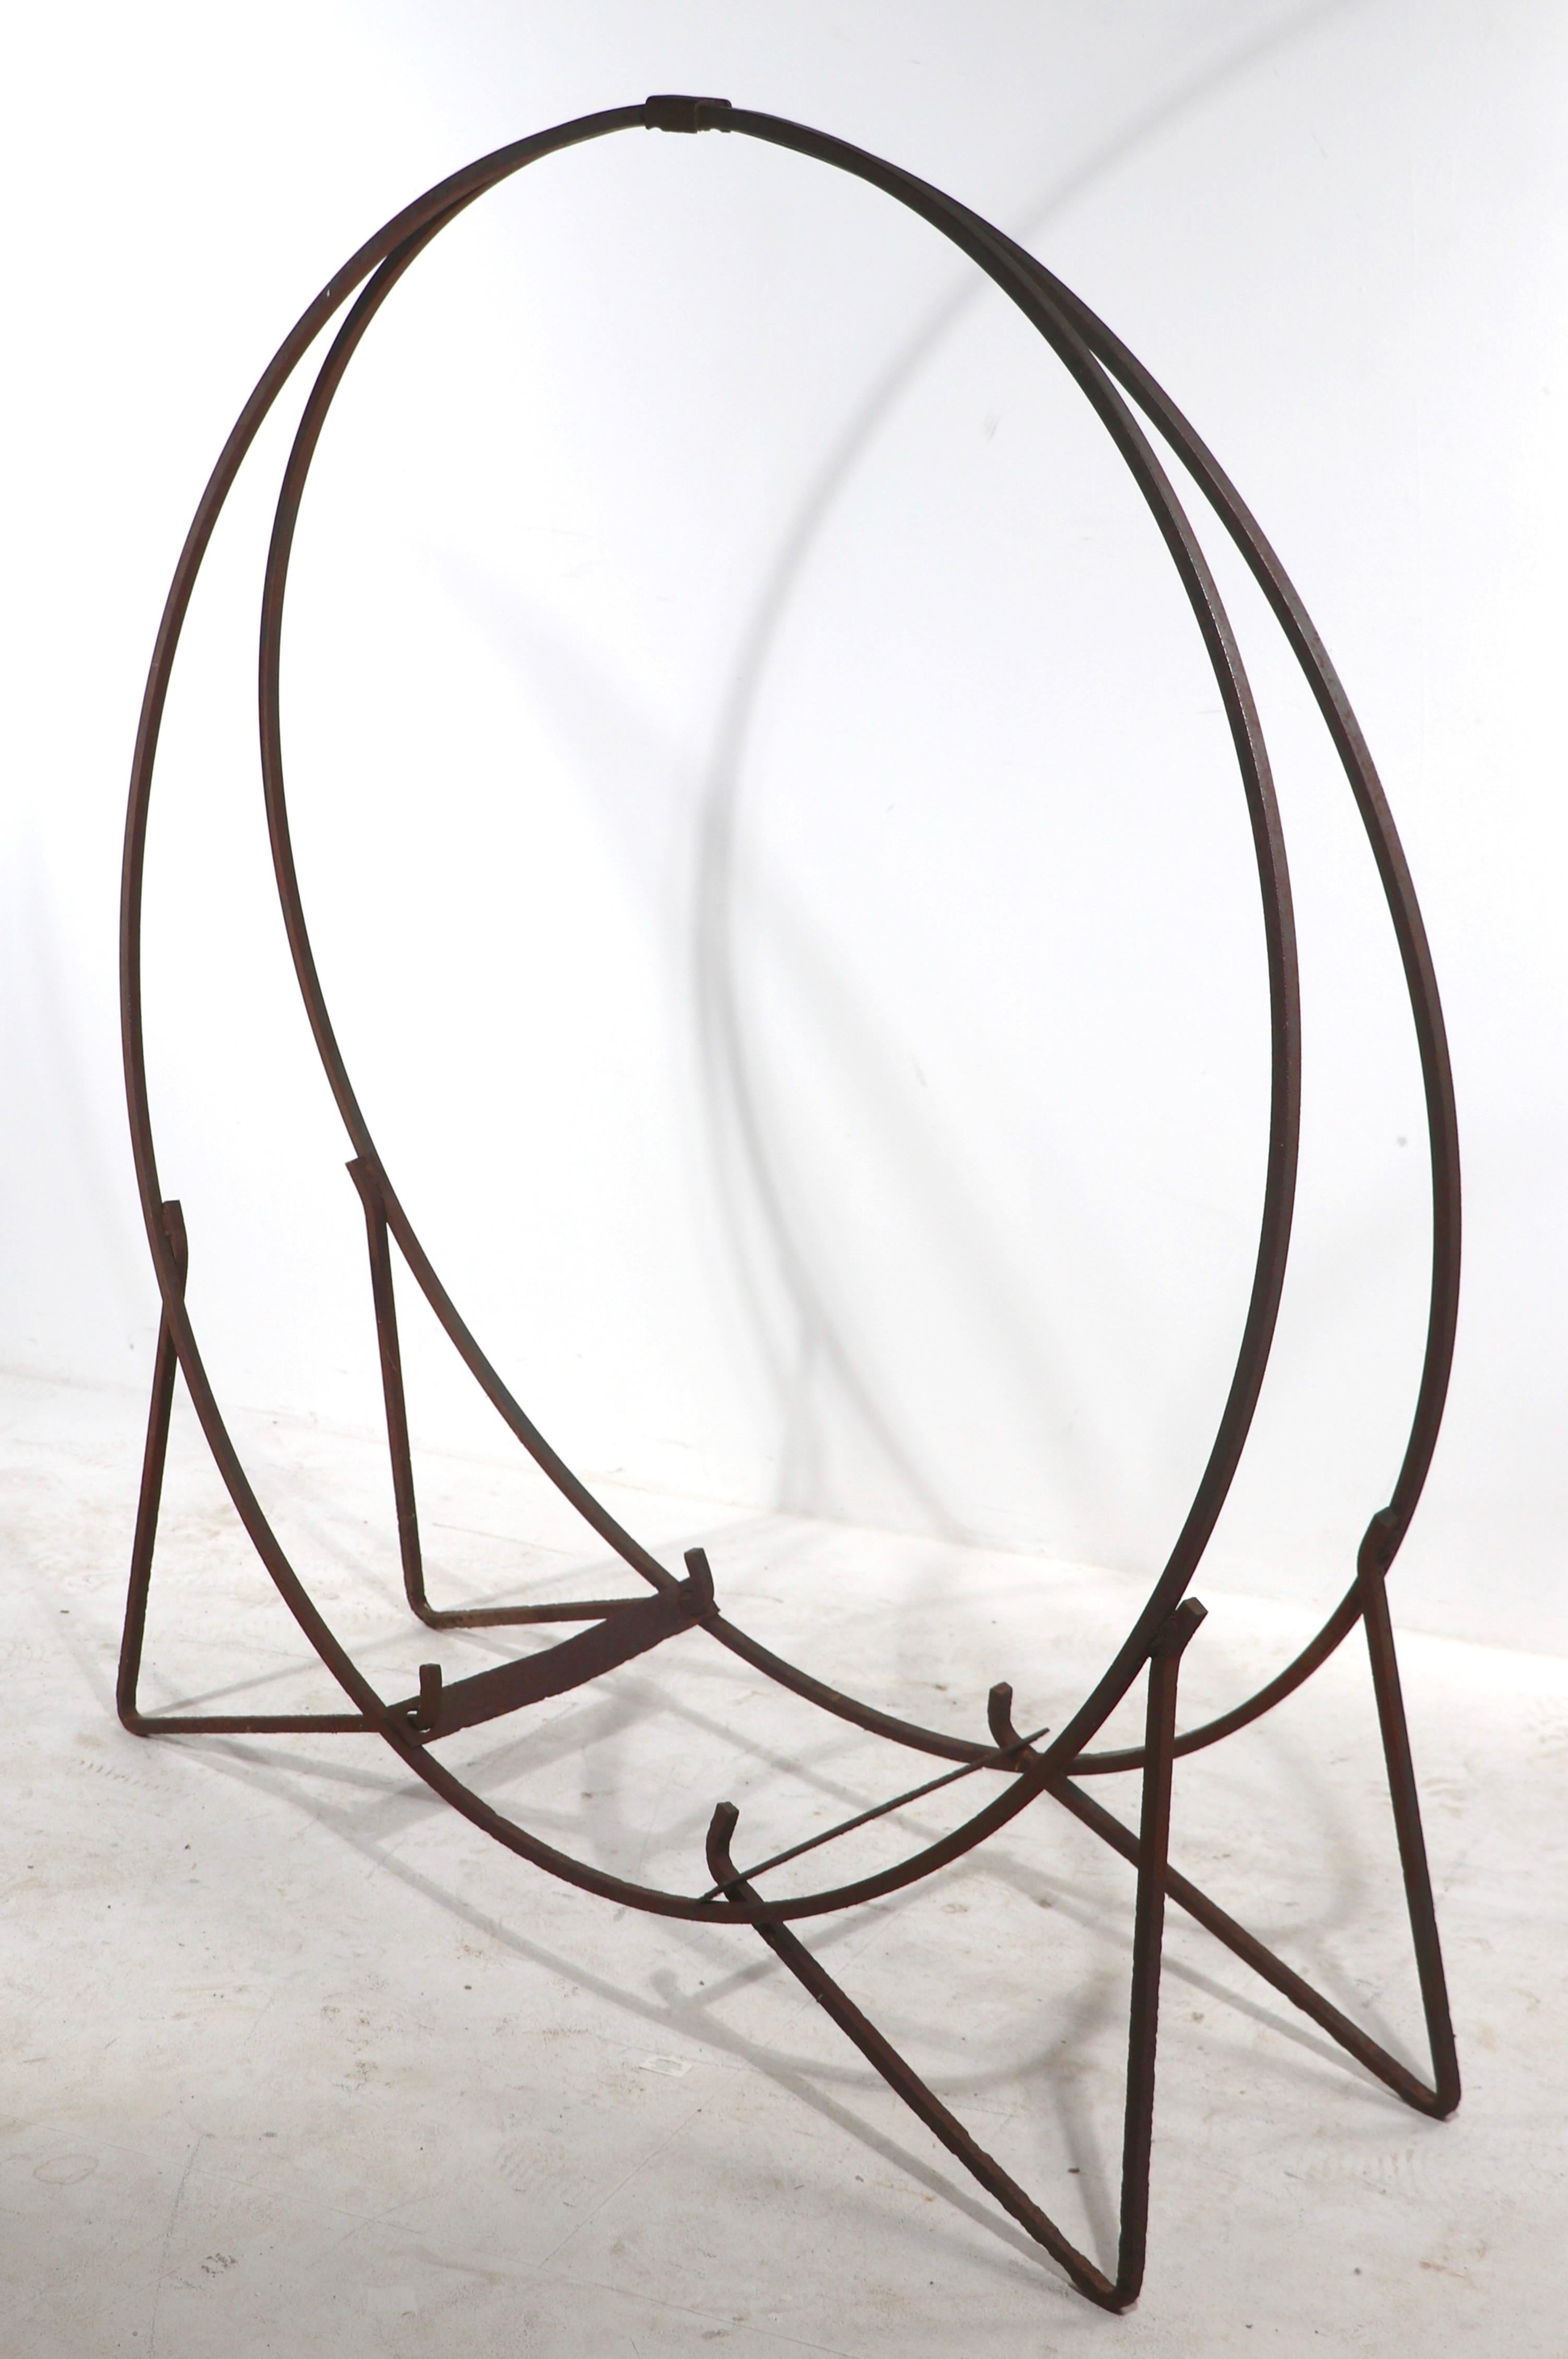 Nice big wrought iron log holder of solid stock wrought iron. This example is structurally sound and sturdy, it shows minor cosmetic wear and signs of use, notably slight bends to the crosspiece supports, normal and consistent with age and use. Nice